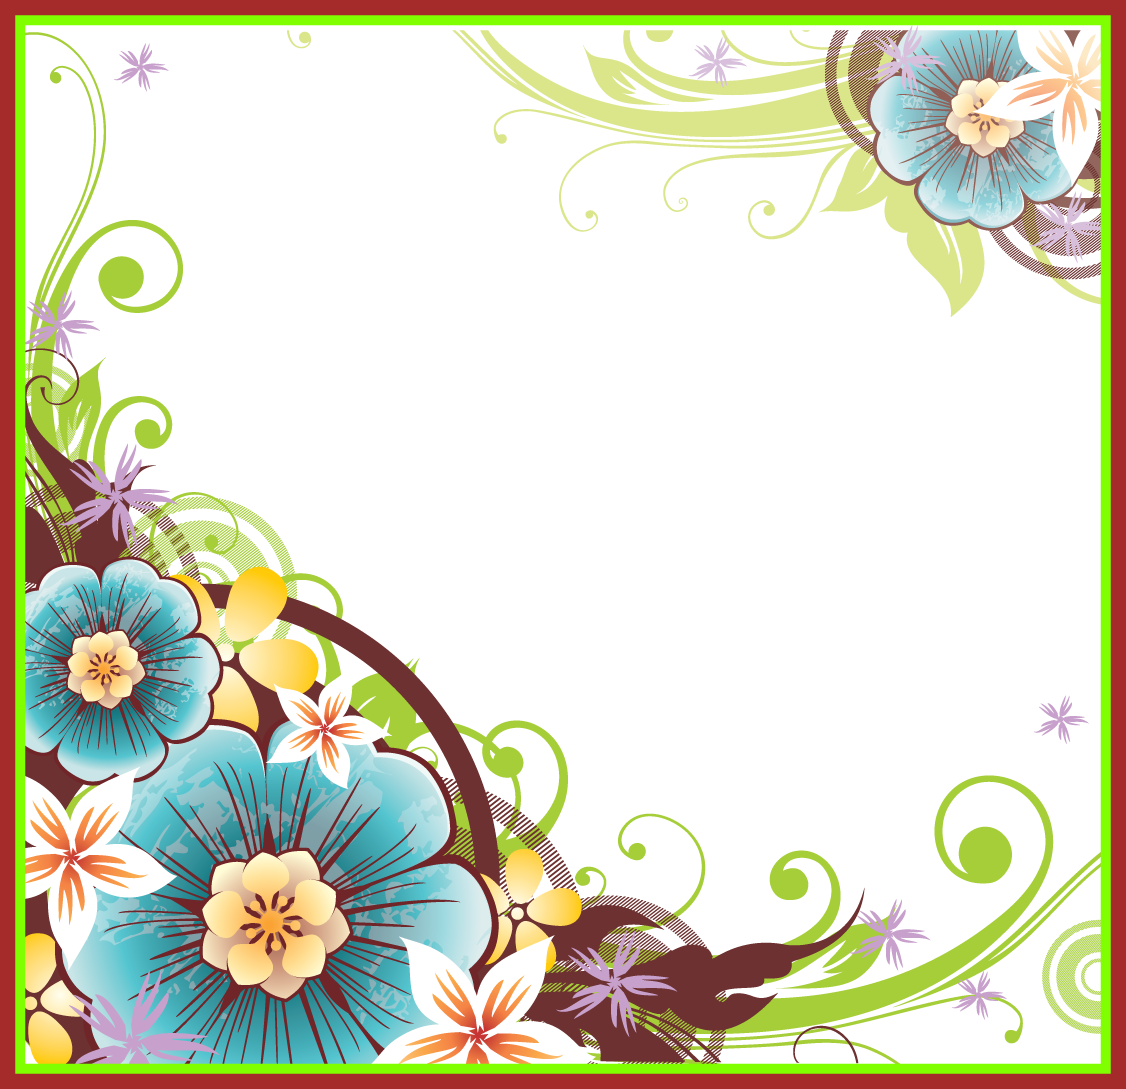 Amazing Flower Vector Png Border Patterns Pic Of Sunflower - Amazing Flower Vector Png Border Patterns Pic Of Sunflower (1126x1089)